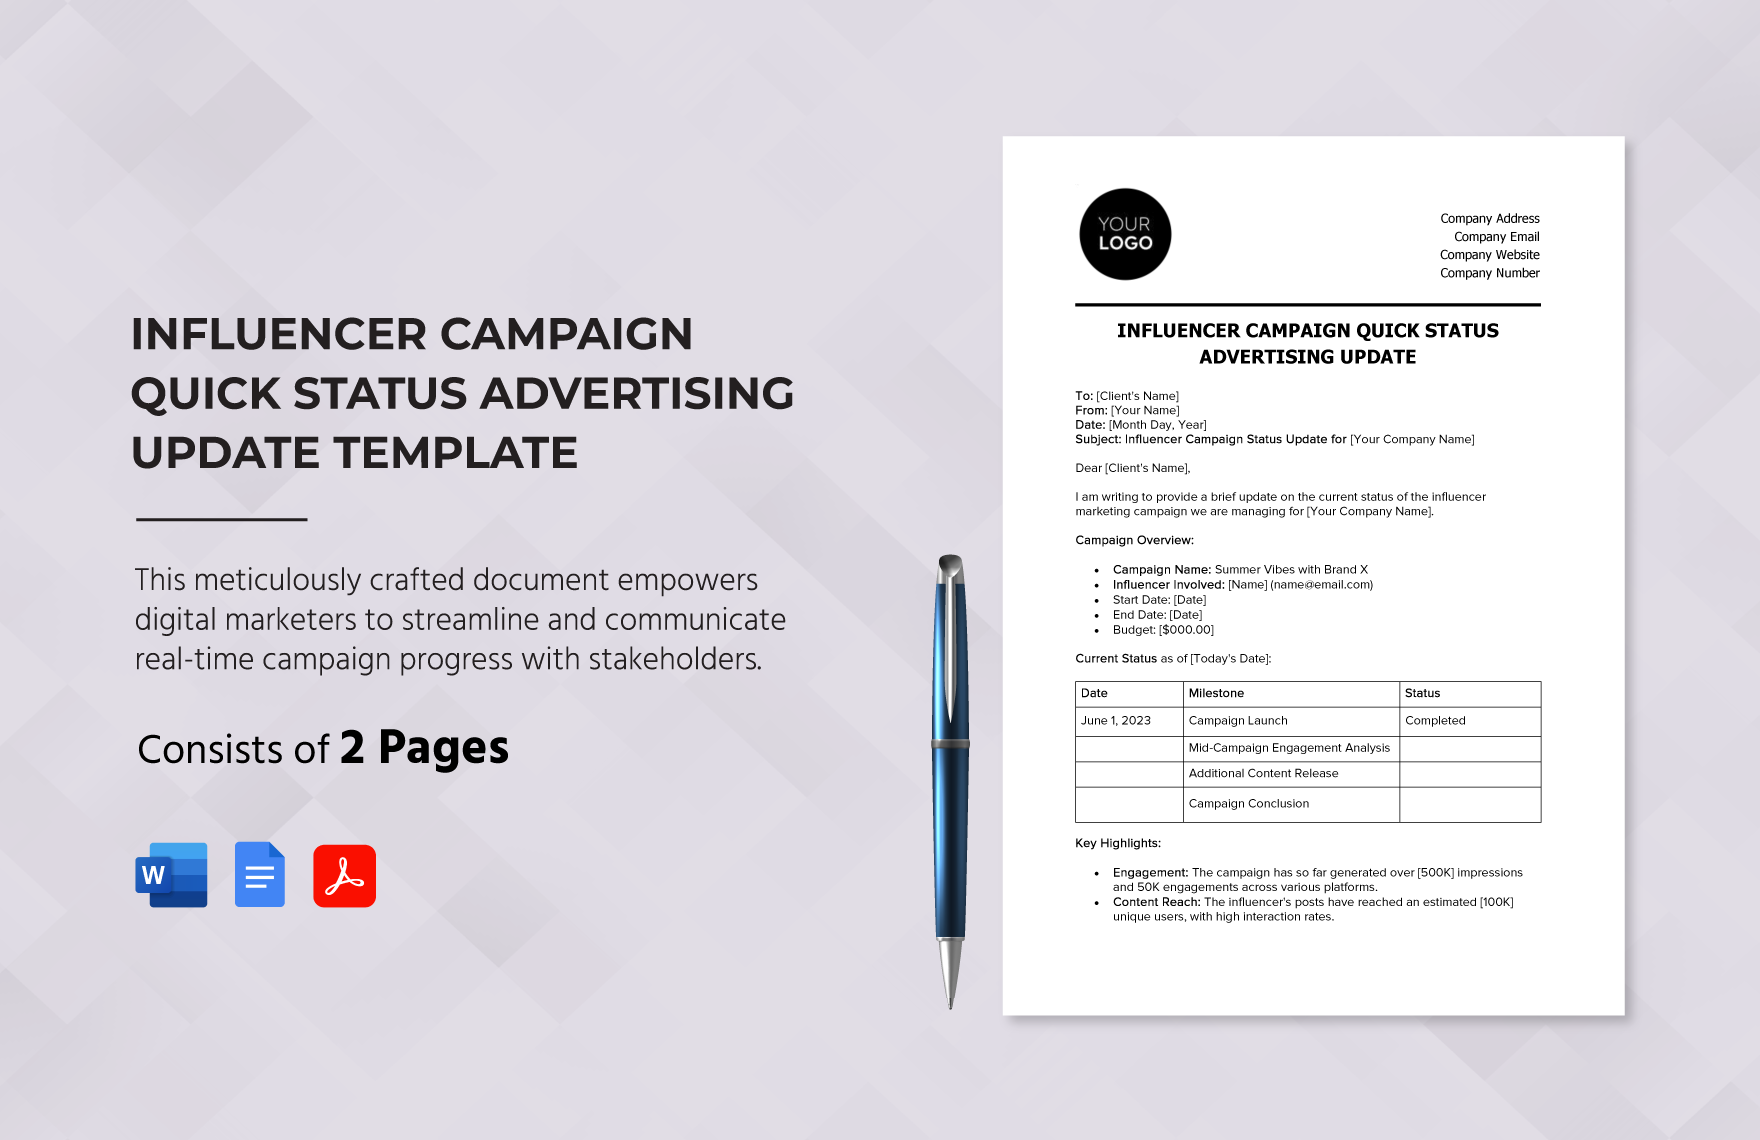 Influencer Campaign Quick Status Advertising Update Template in Word, Google Docs, PDF